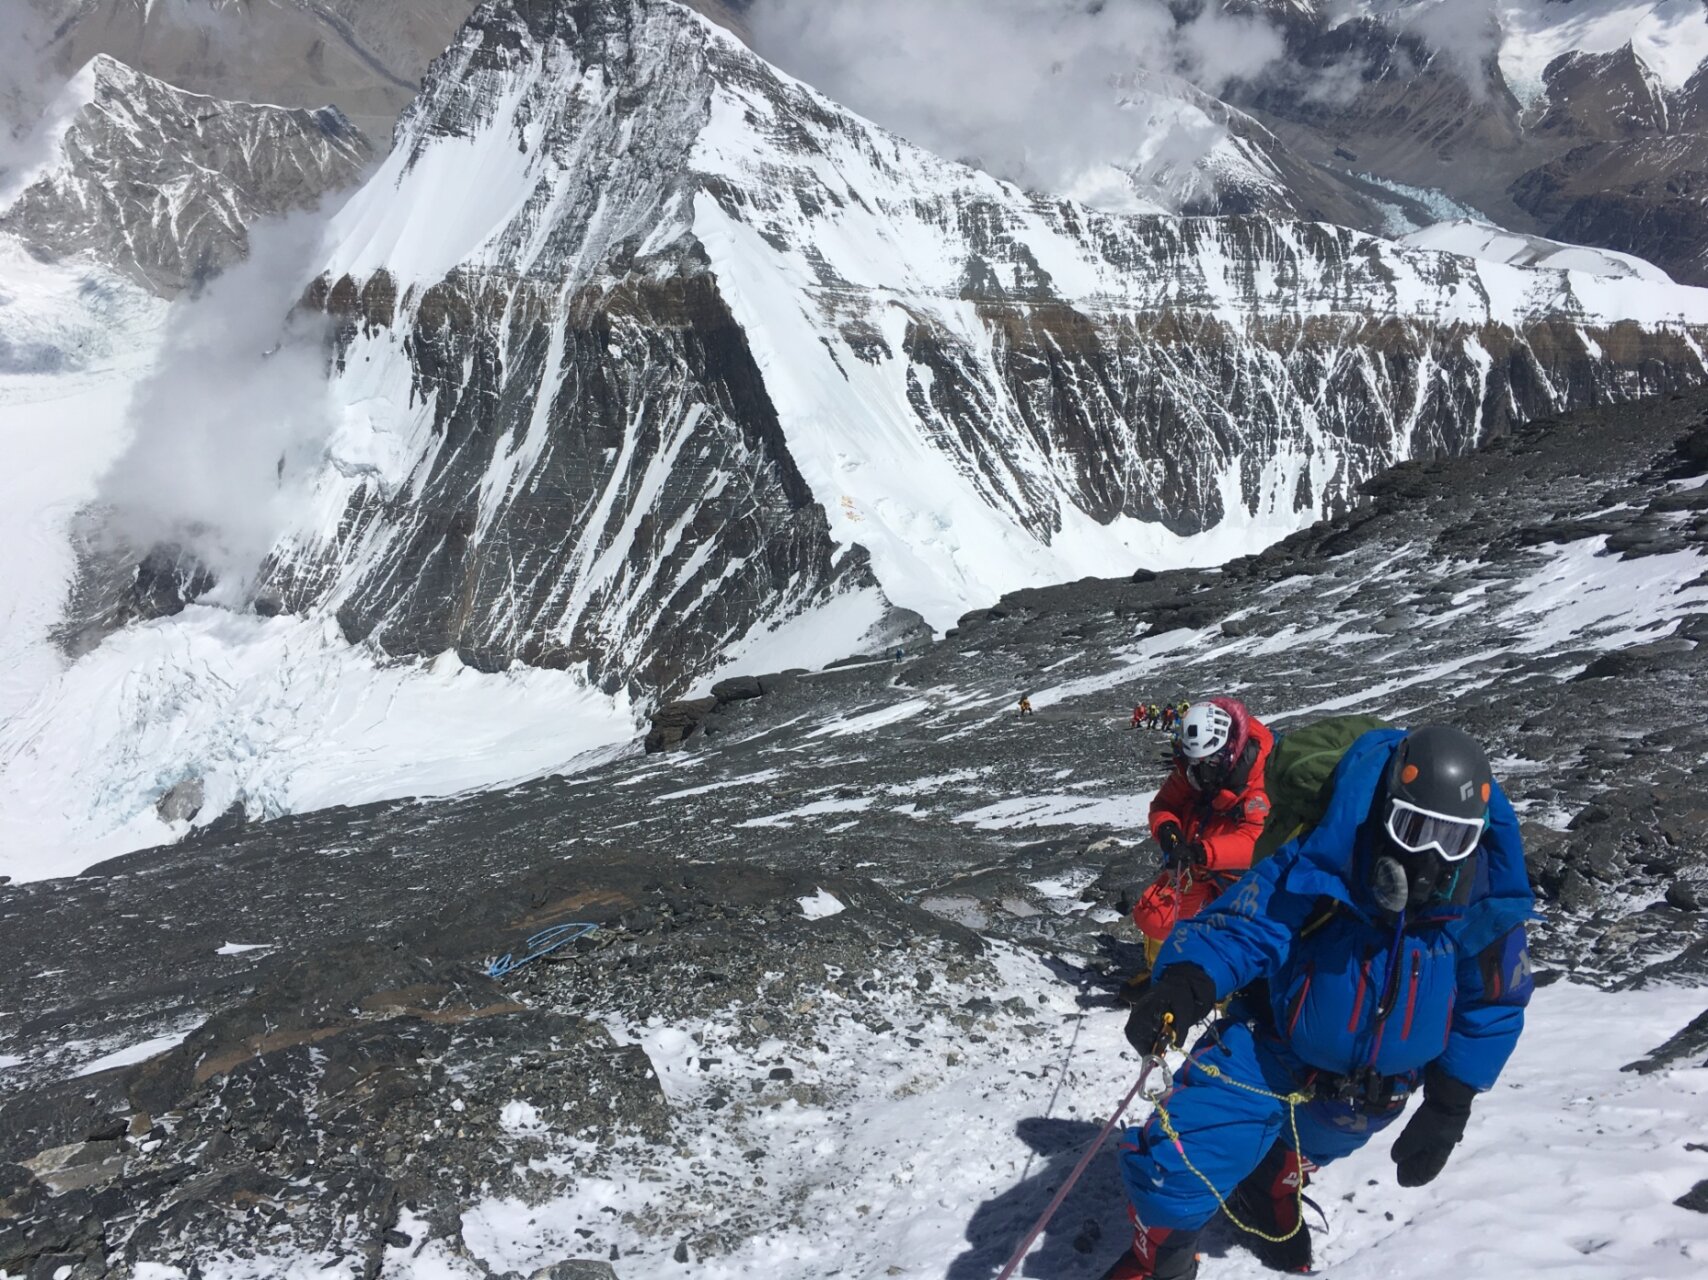 Climbers on the route up the North Side of Mount Everest during Alpenglow Expeditions' Mount Everest North Side Rapid Ascent Expedition.